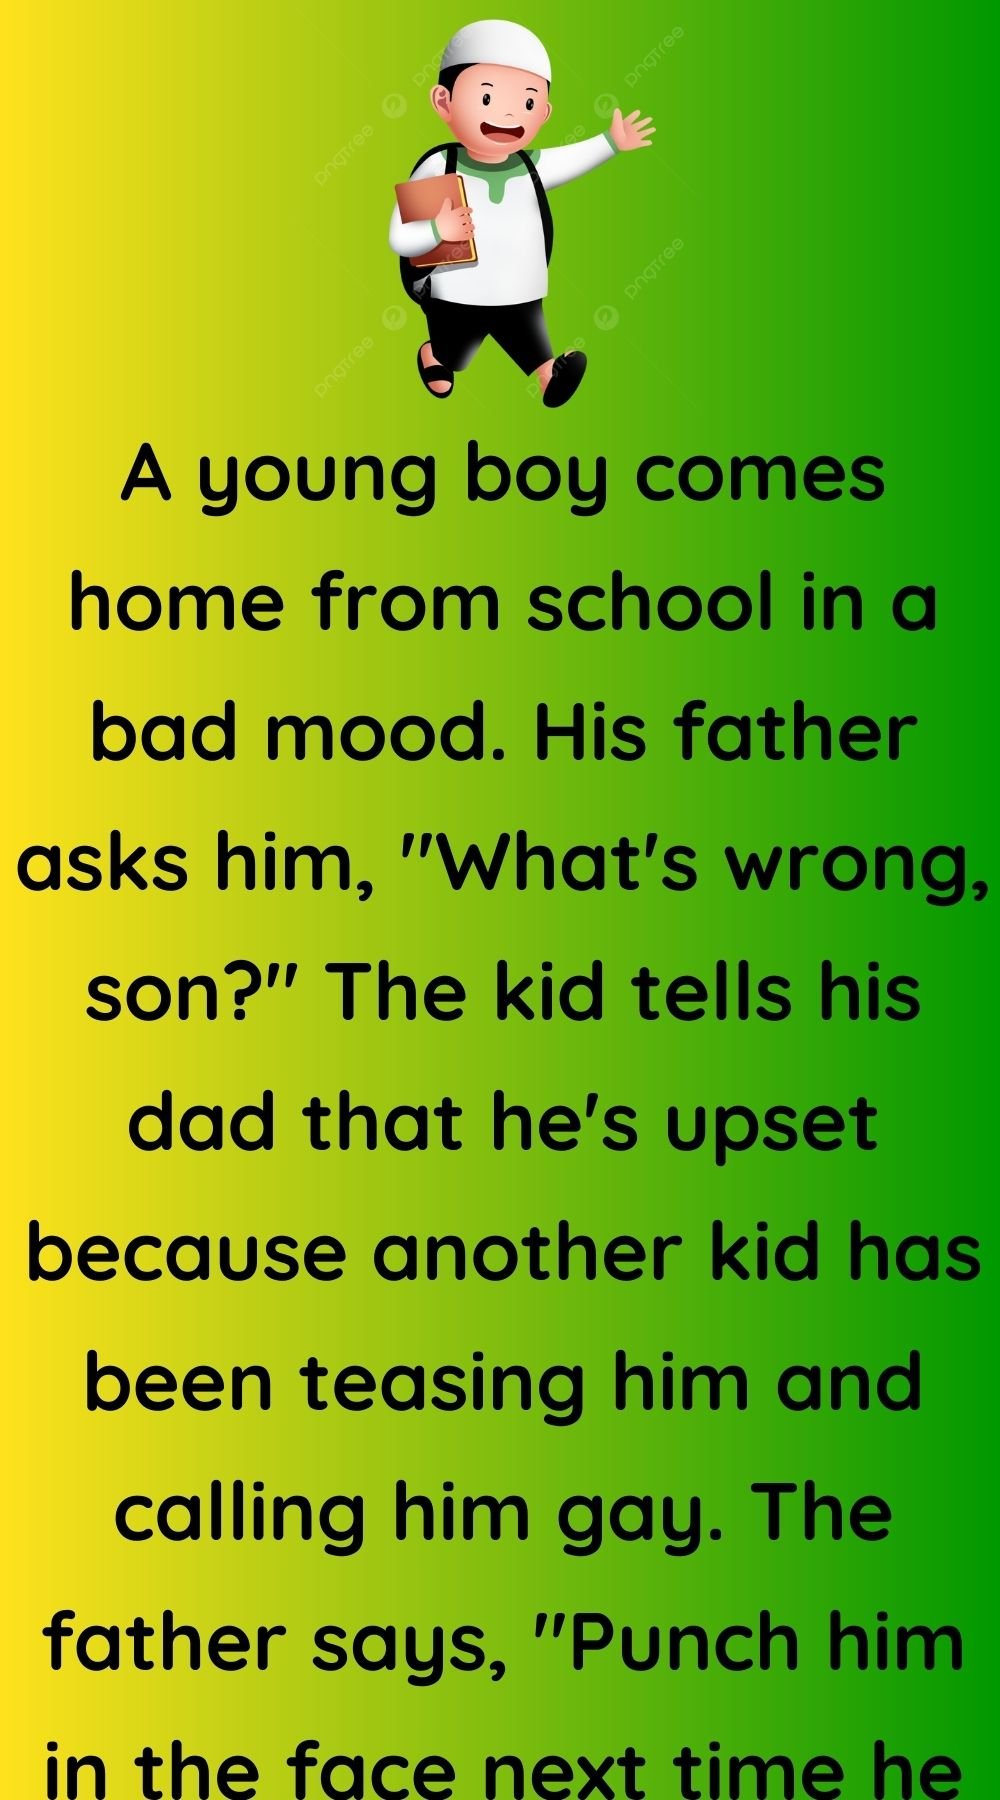 A young boy comes home from school in a bad mood